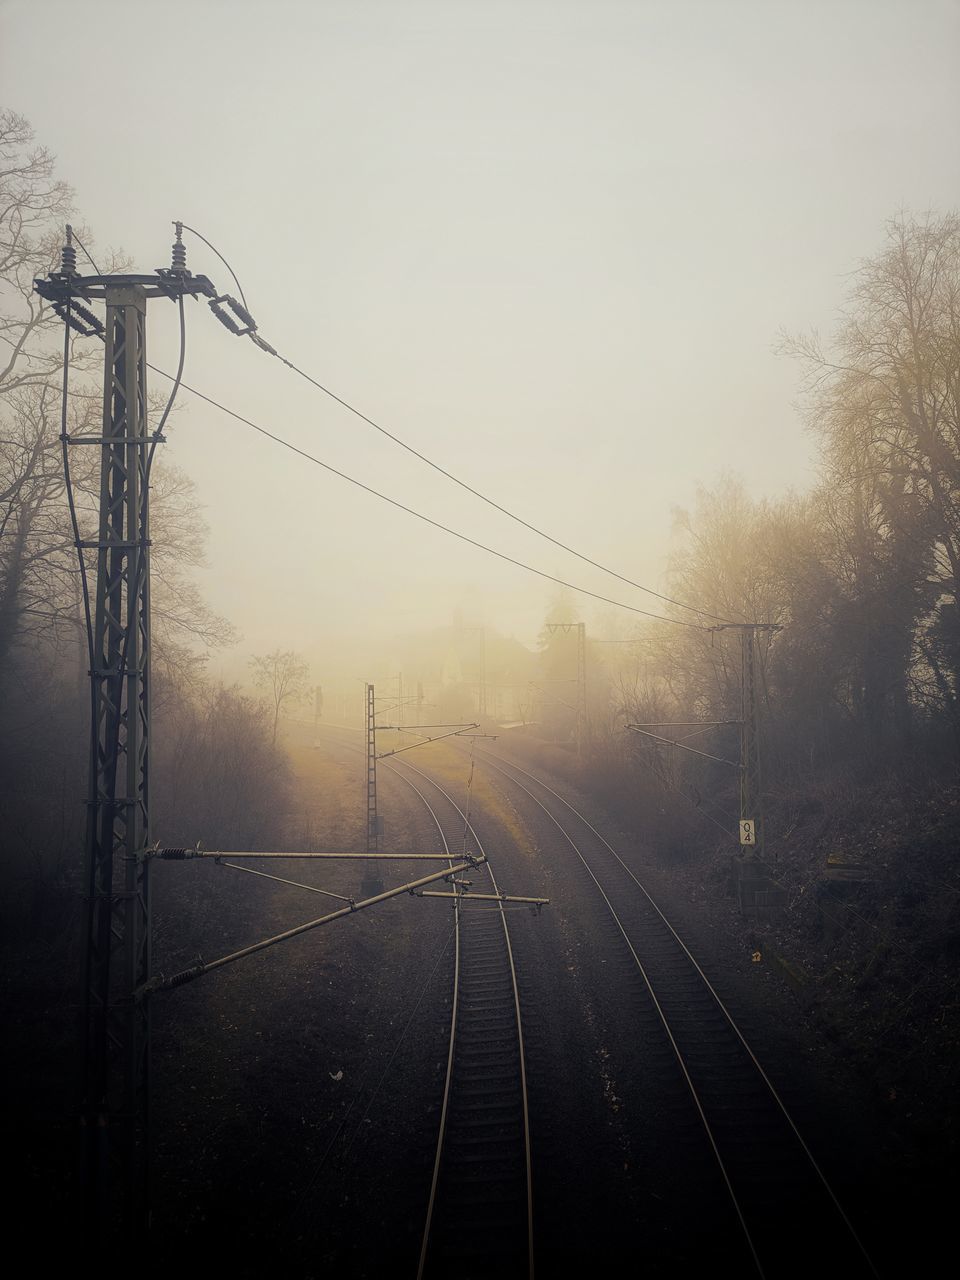 morning, cable, fog, railroad track, track, electricity, rail transportation, transportation, sky, nature, electricity pylon, darkness, power line, technology, line, no people, mist, power supply, tree, light, mode of transportation, dawn, sunlight, outdoors, plant, electrical supply, overhead power line, public transportation, silhouette